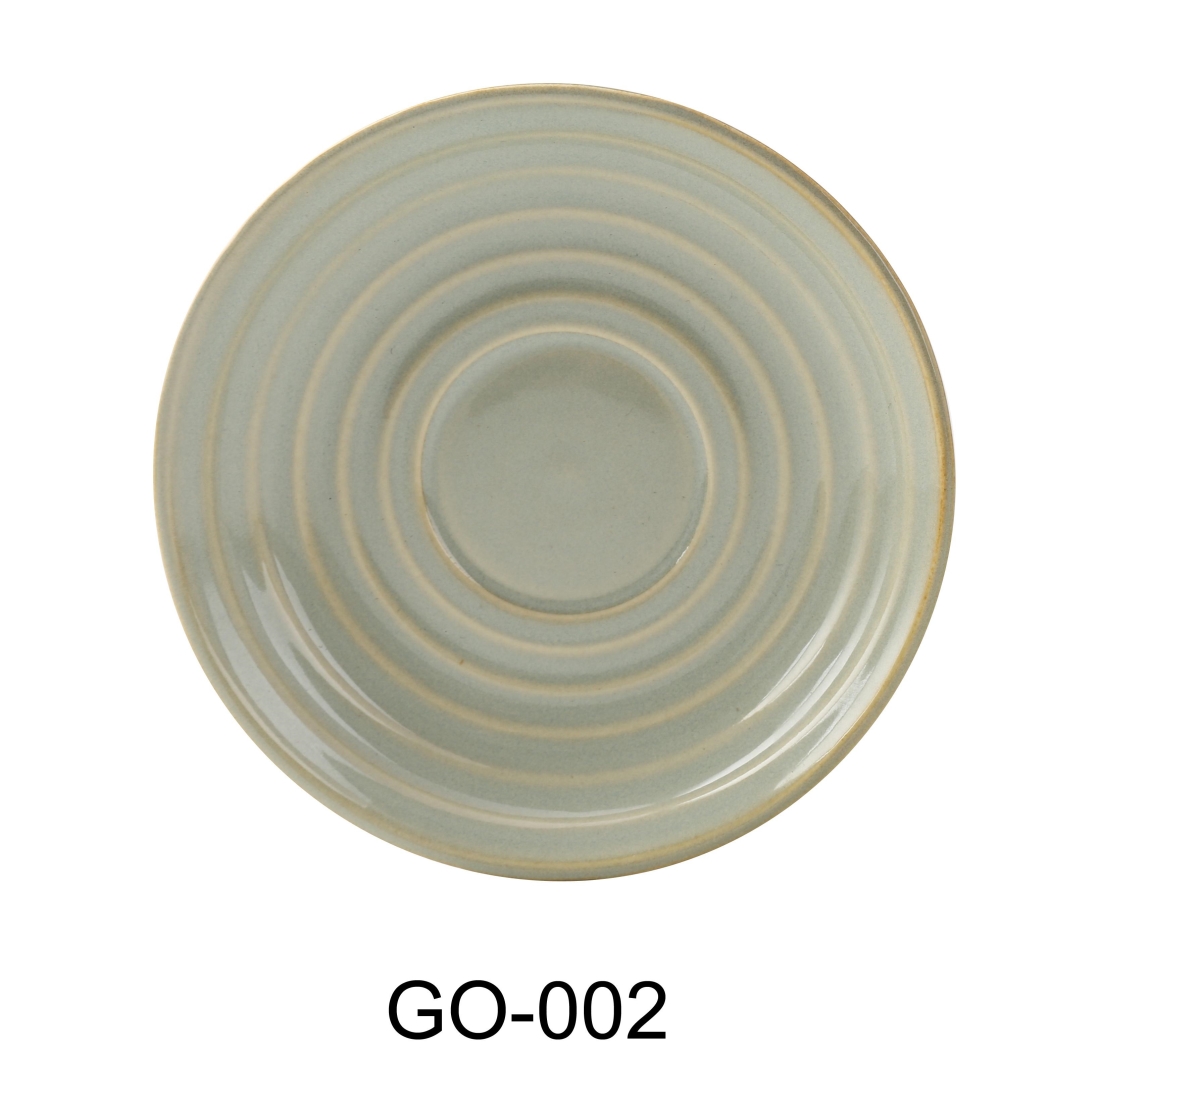 Picture of Yanco GO-002 Golden Coast 5.875 in. Saucer - China - Pack of 36